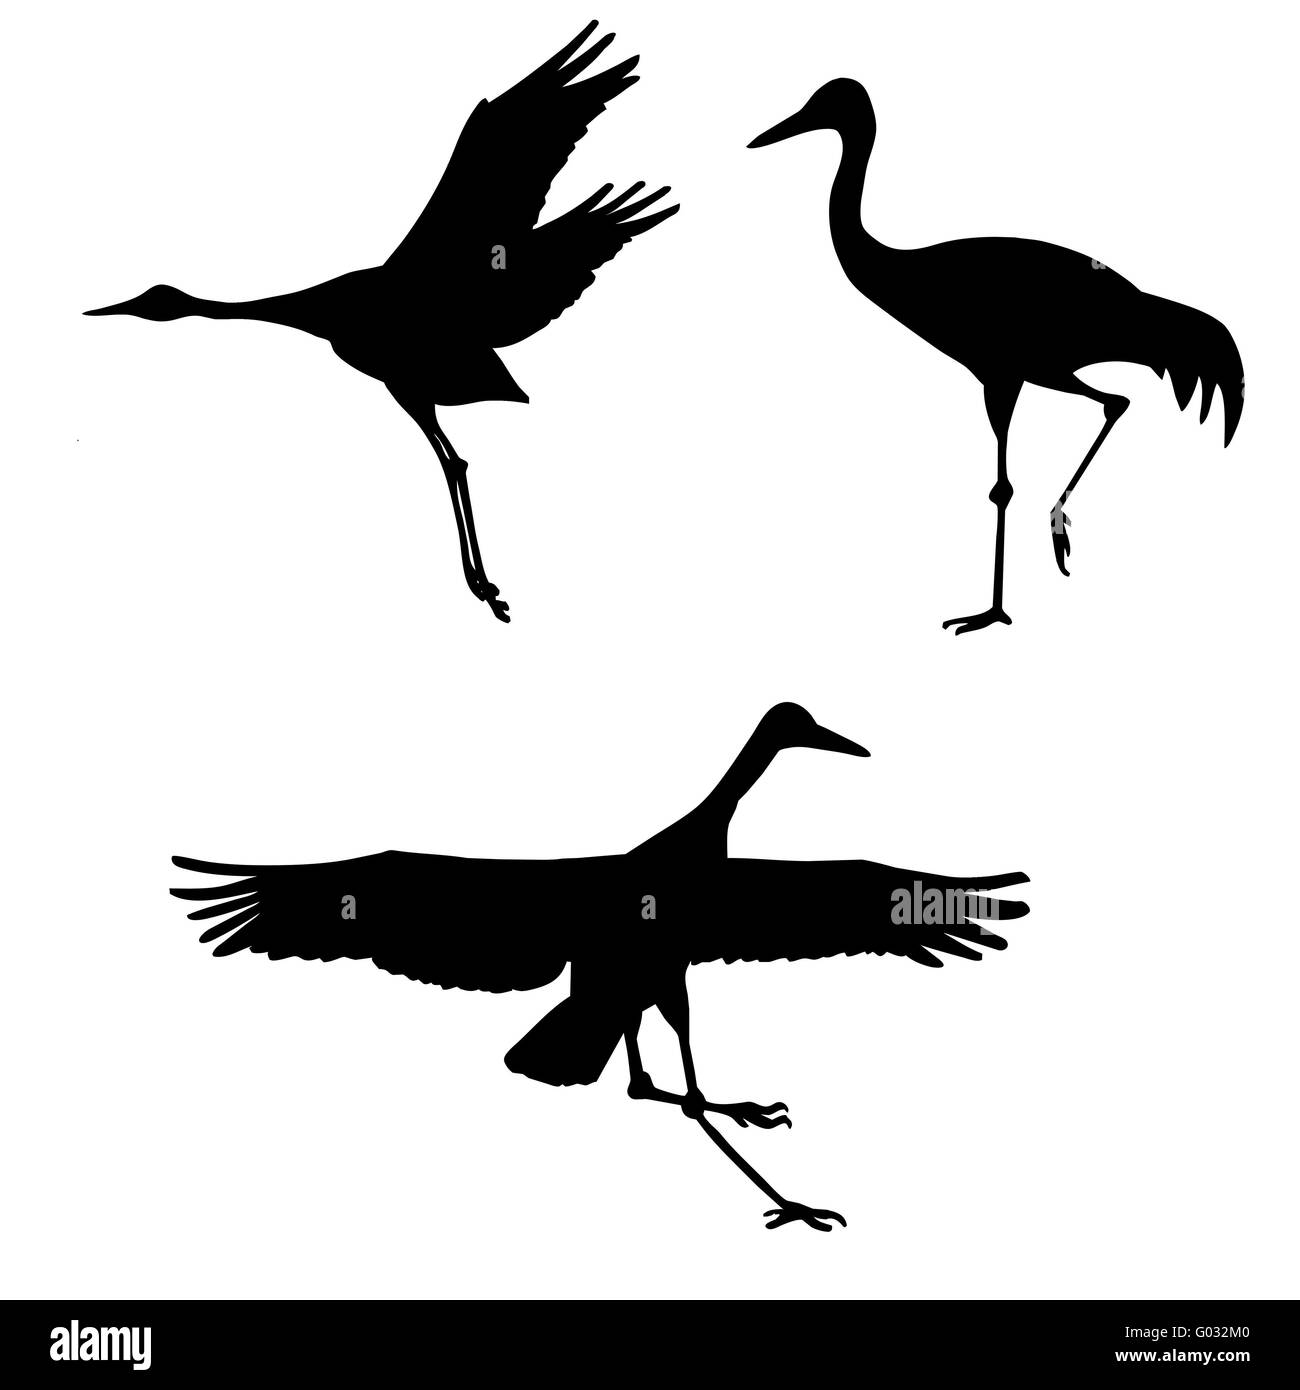 vector silhouette of the cranes on white background Stock Photo